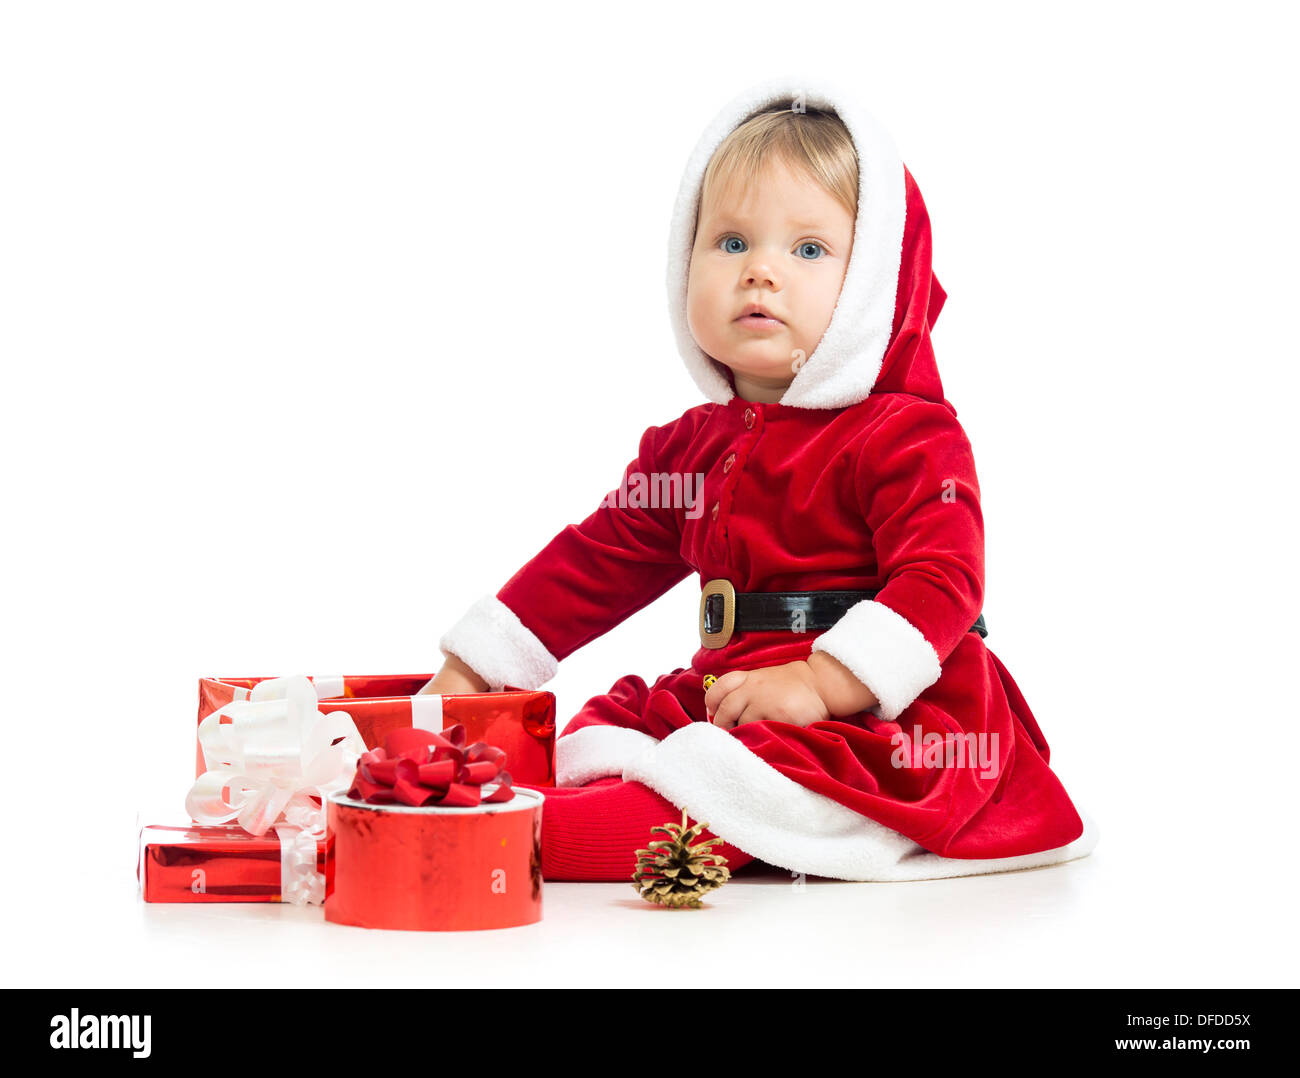 Christmas baby girl with gift box isolated on white Banque D'Images